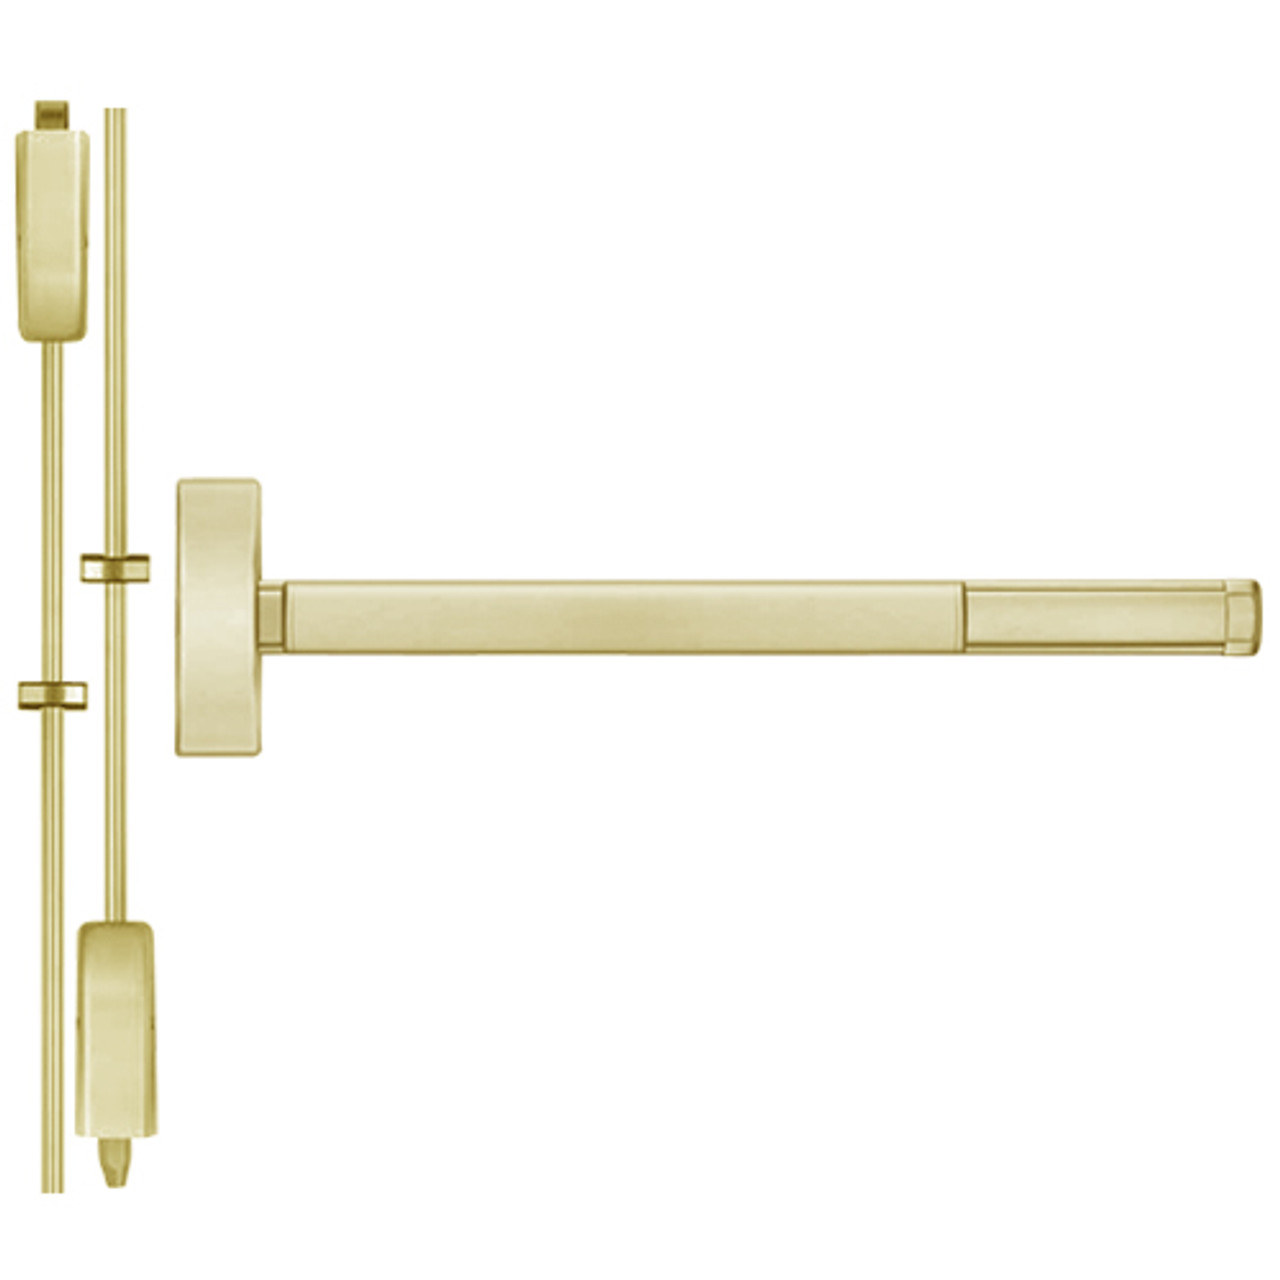 TS2201LBR-606-36 PHI 2200 Series Non Fire Rated Apex Surface Vertical Rod Device with Touchbar Monitoring Switch Prepped for Cover Plate in Satin Brass Finish